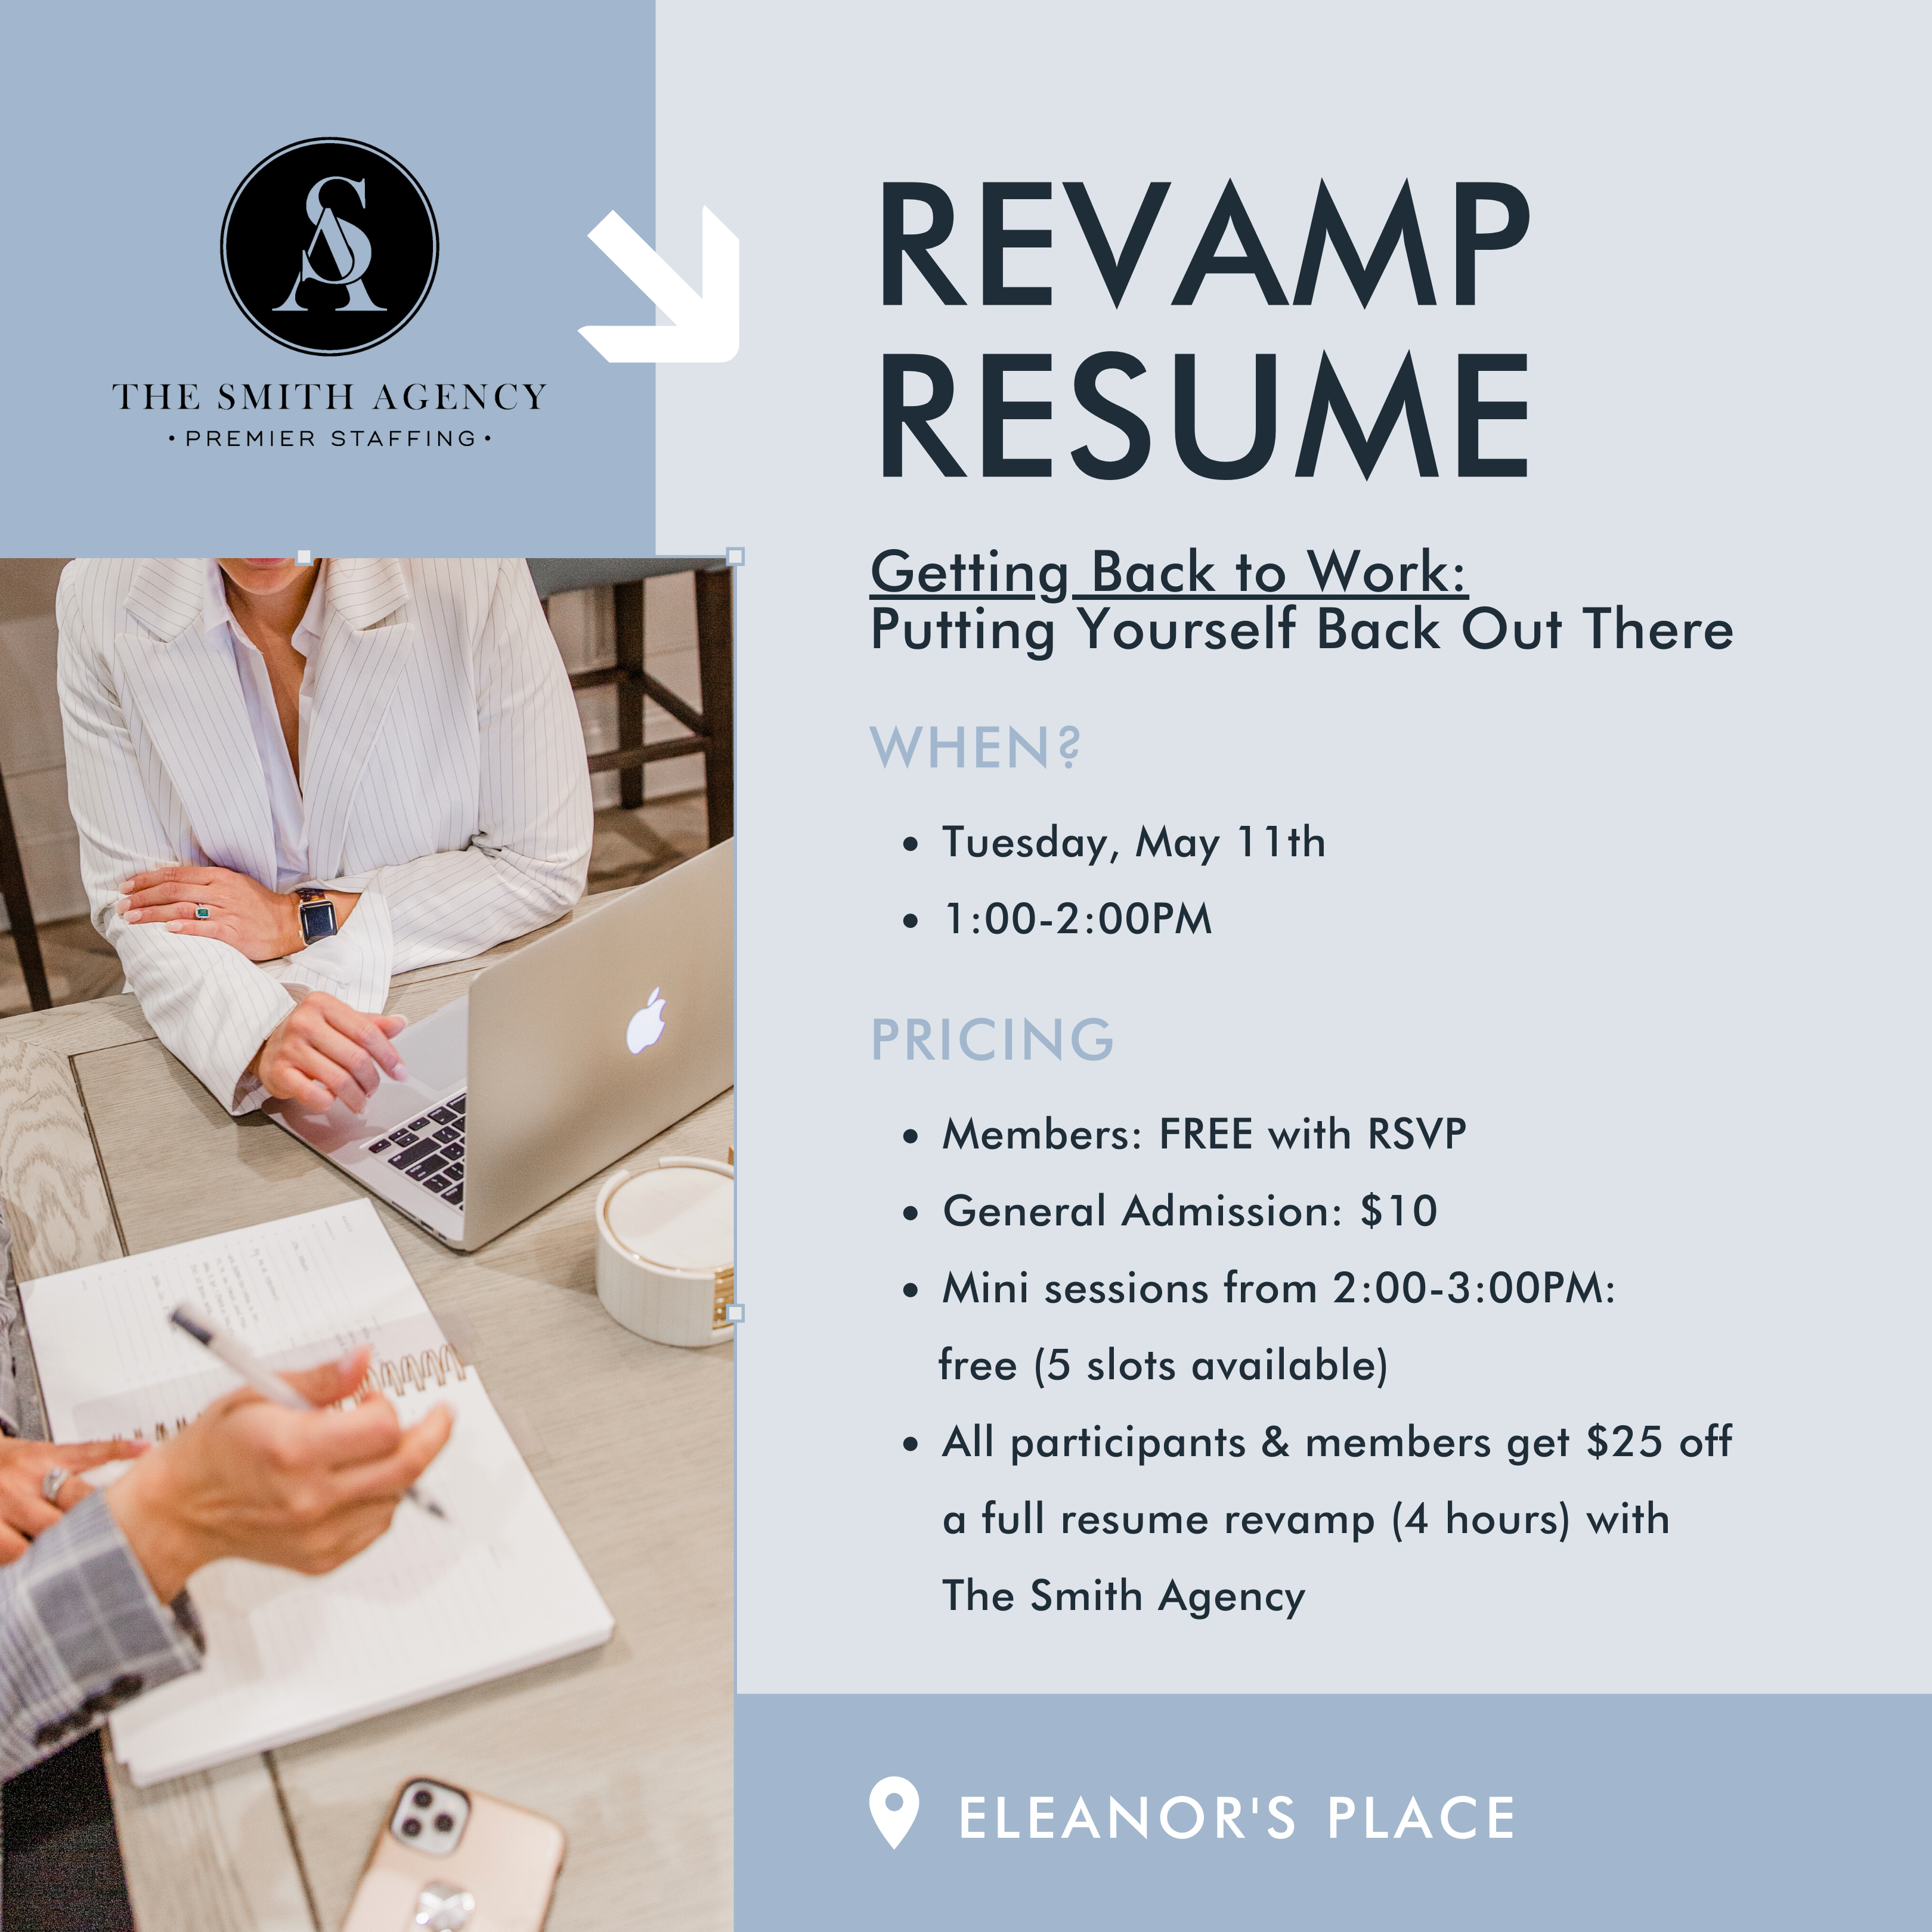 Revamp Resume - Getting Back to Work: How to Put Yourself Back Out There